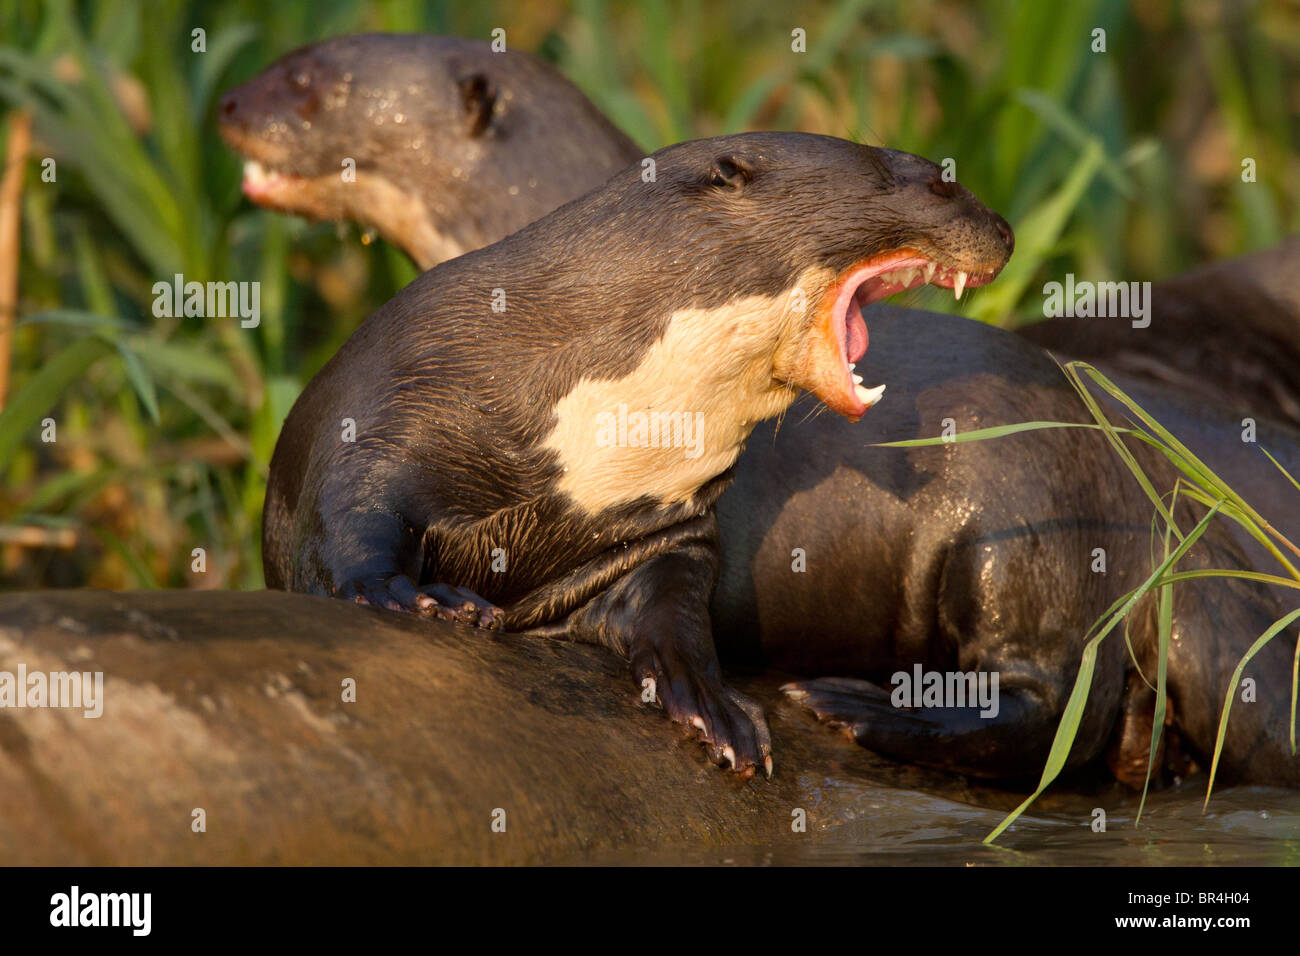 Giant otter growling at other otters in the Brazil Pantanal Stock Photo